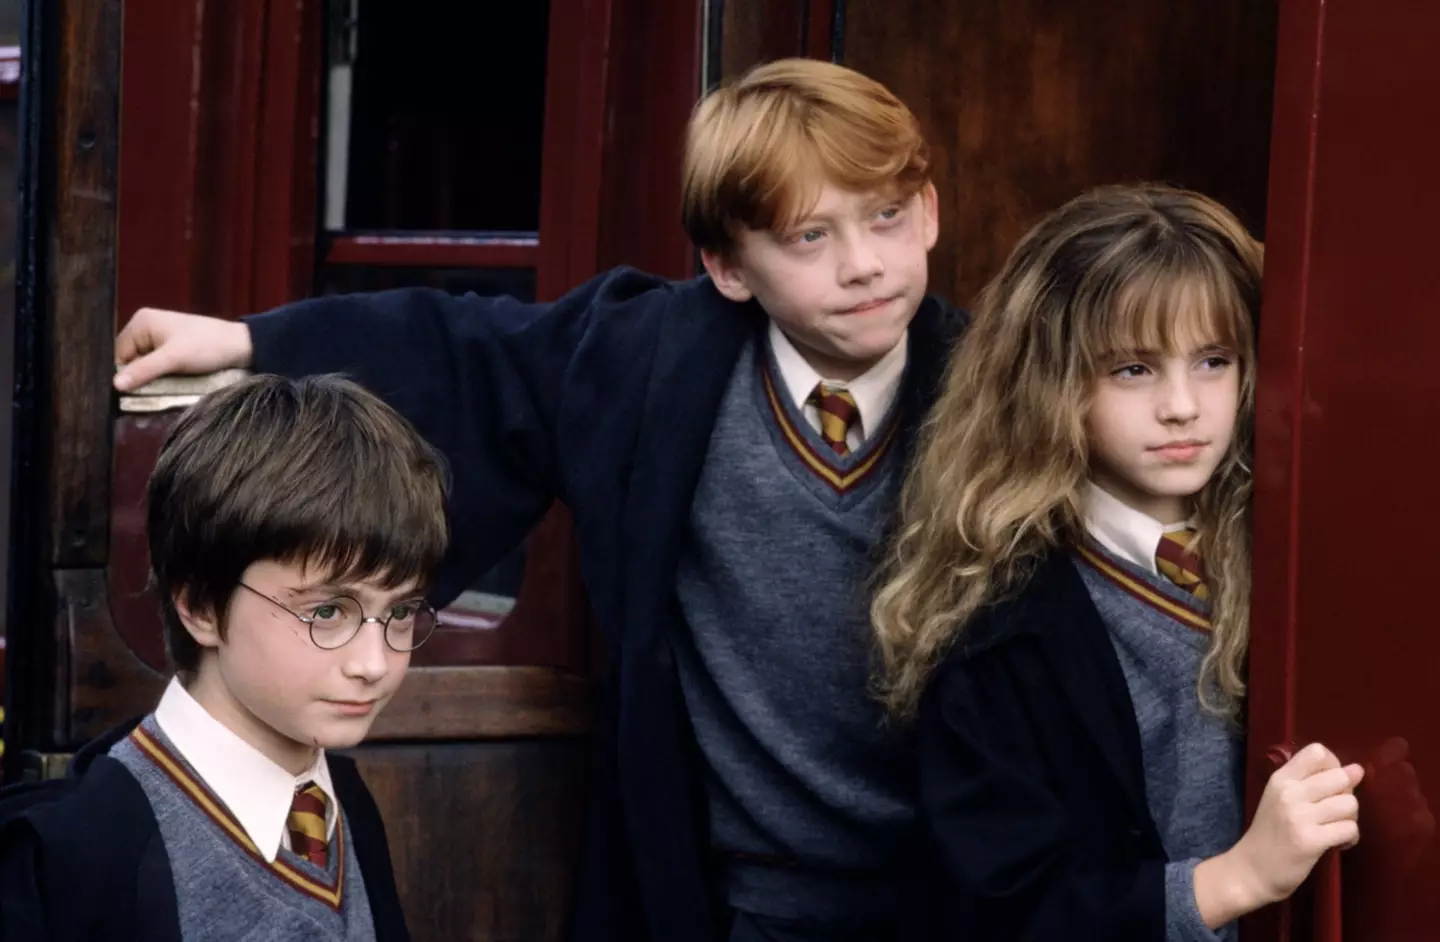 It's been 20 years since we were first introduced to the Harry Potter films (